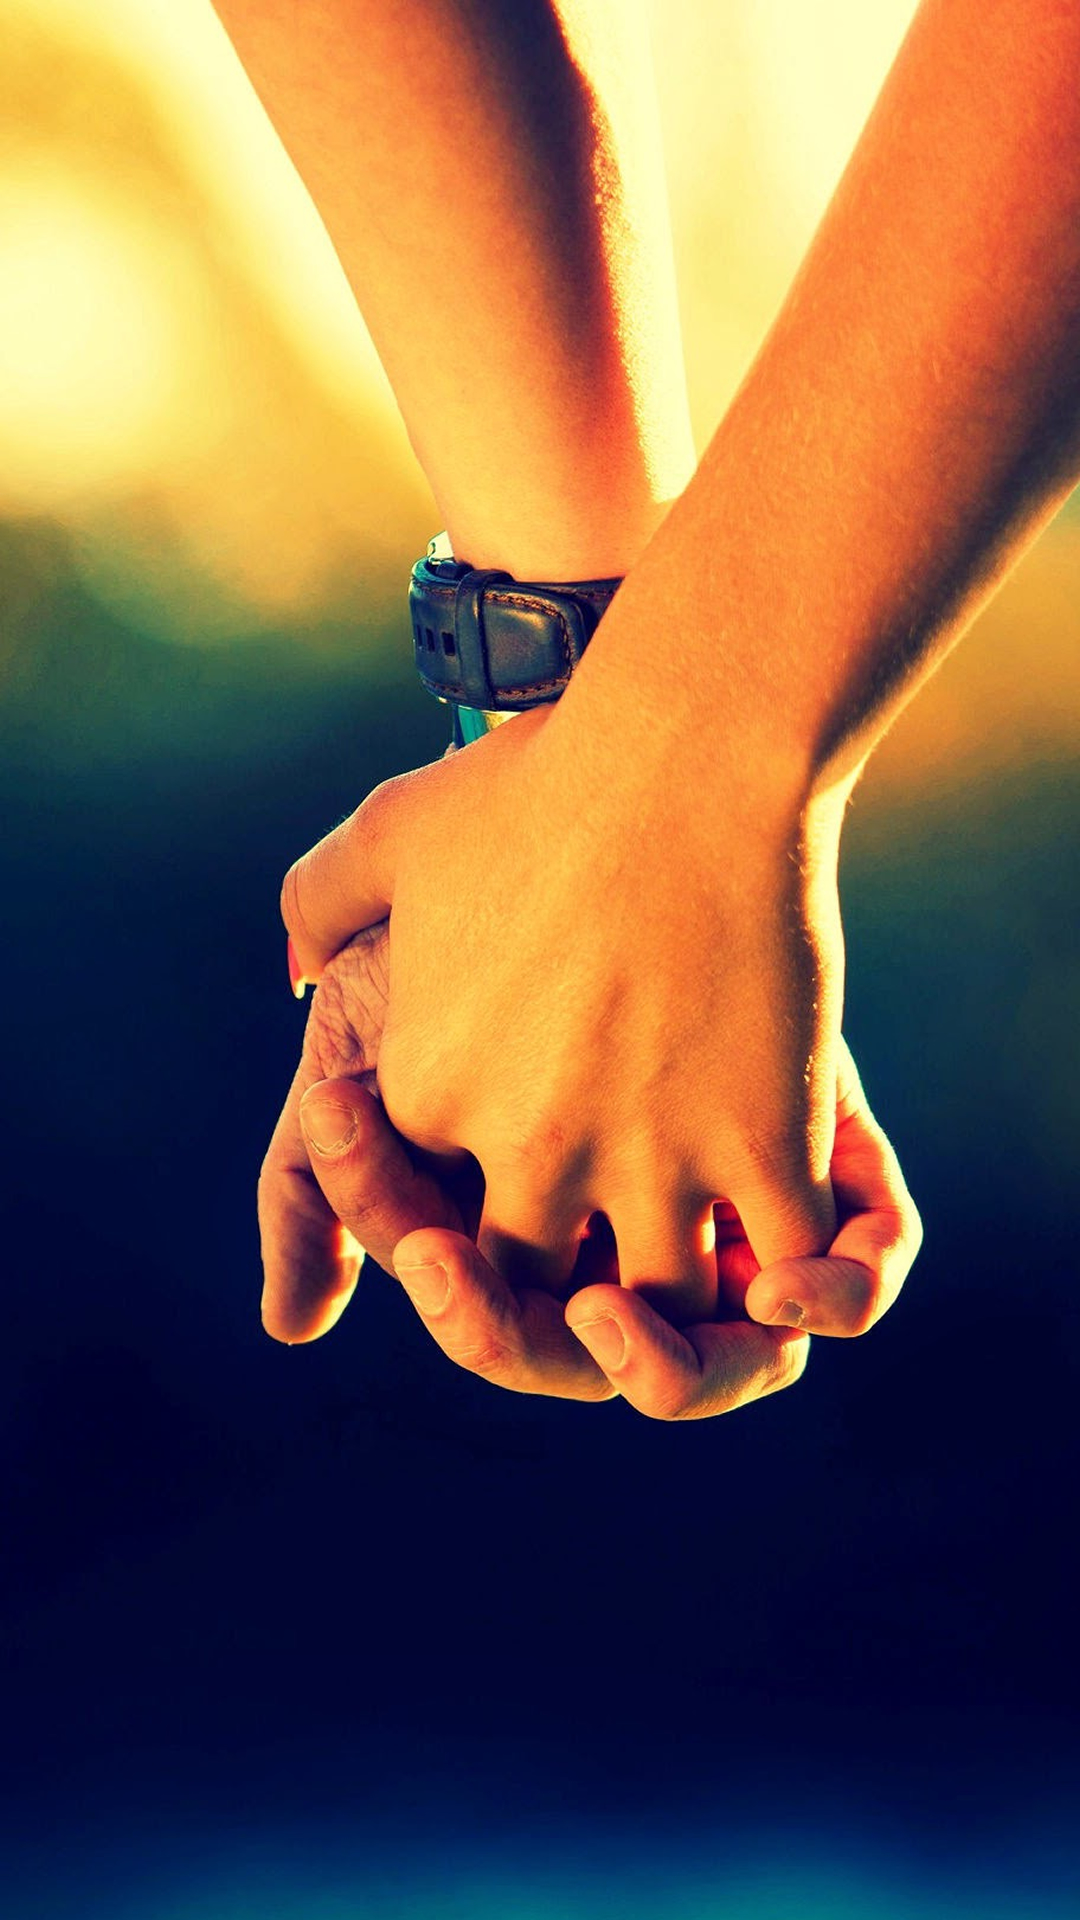 Couple Holding Hands iPhone 6 Wallpaper Download iPhone Wallpapers